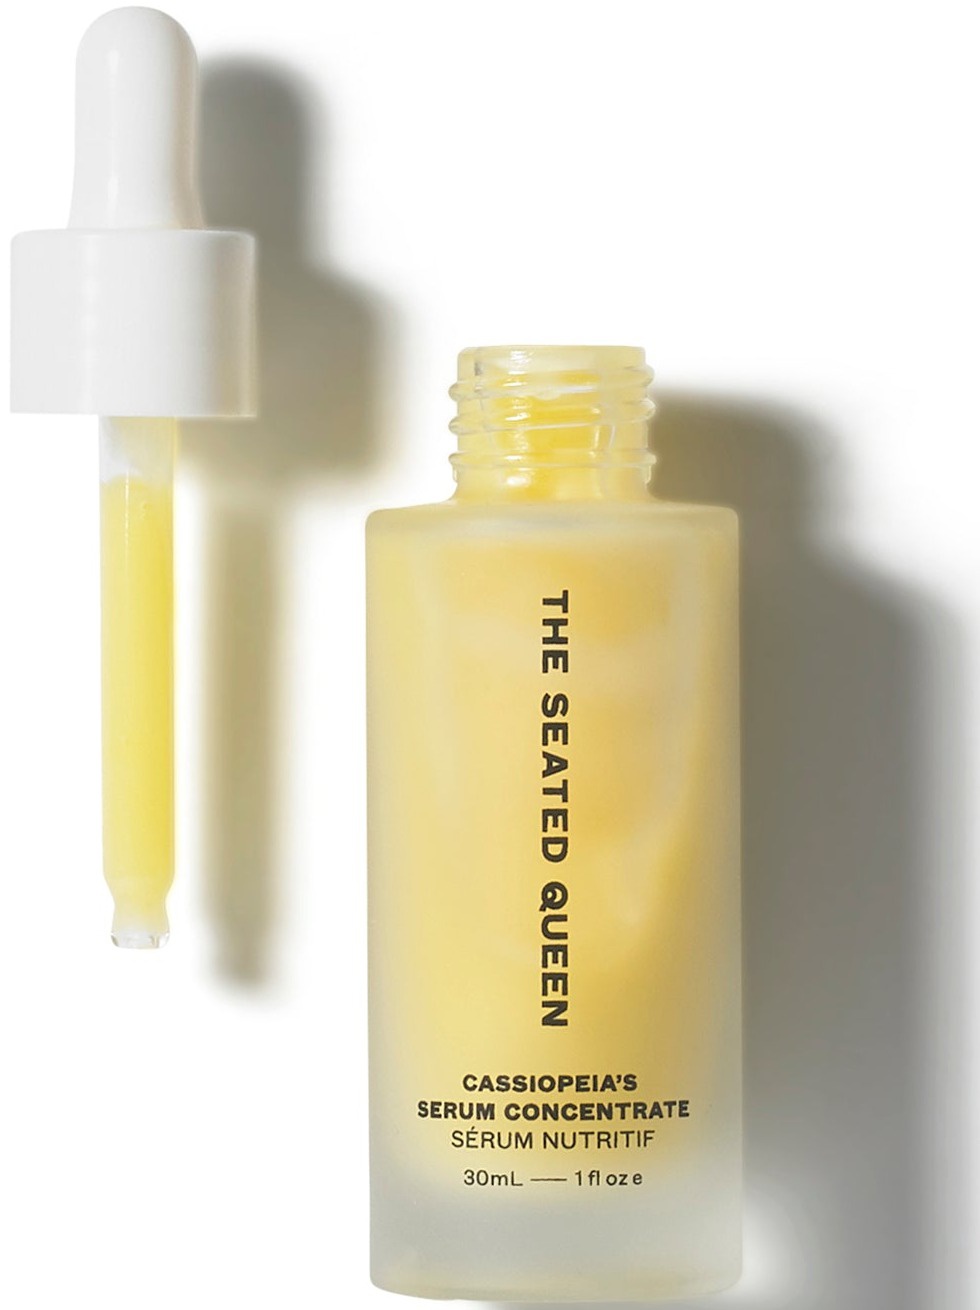 The Seated Queen Cassiopeia's Serum Concentrate